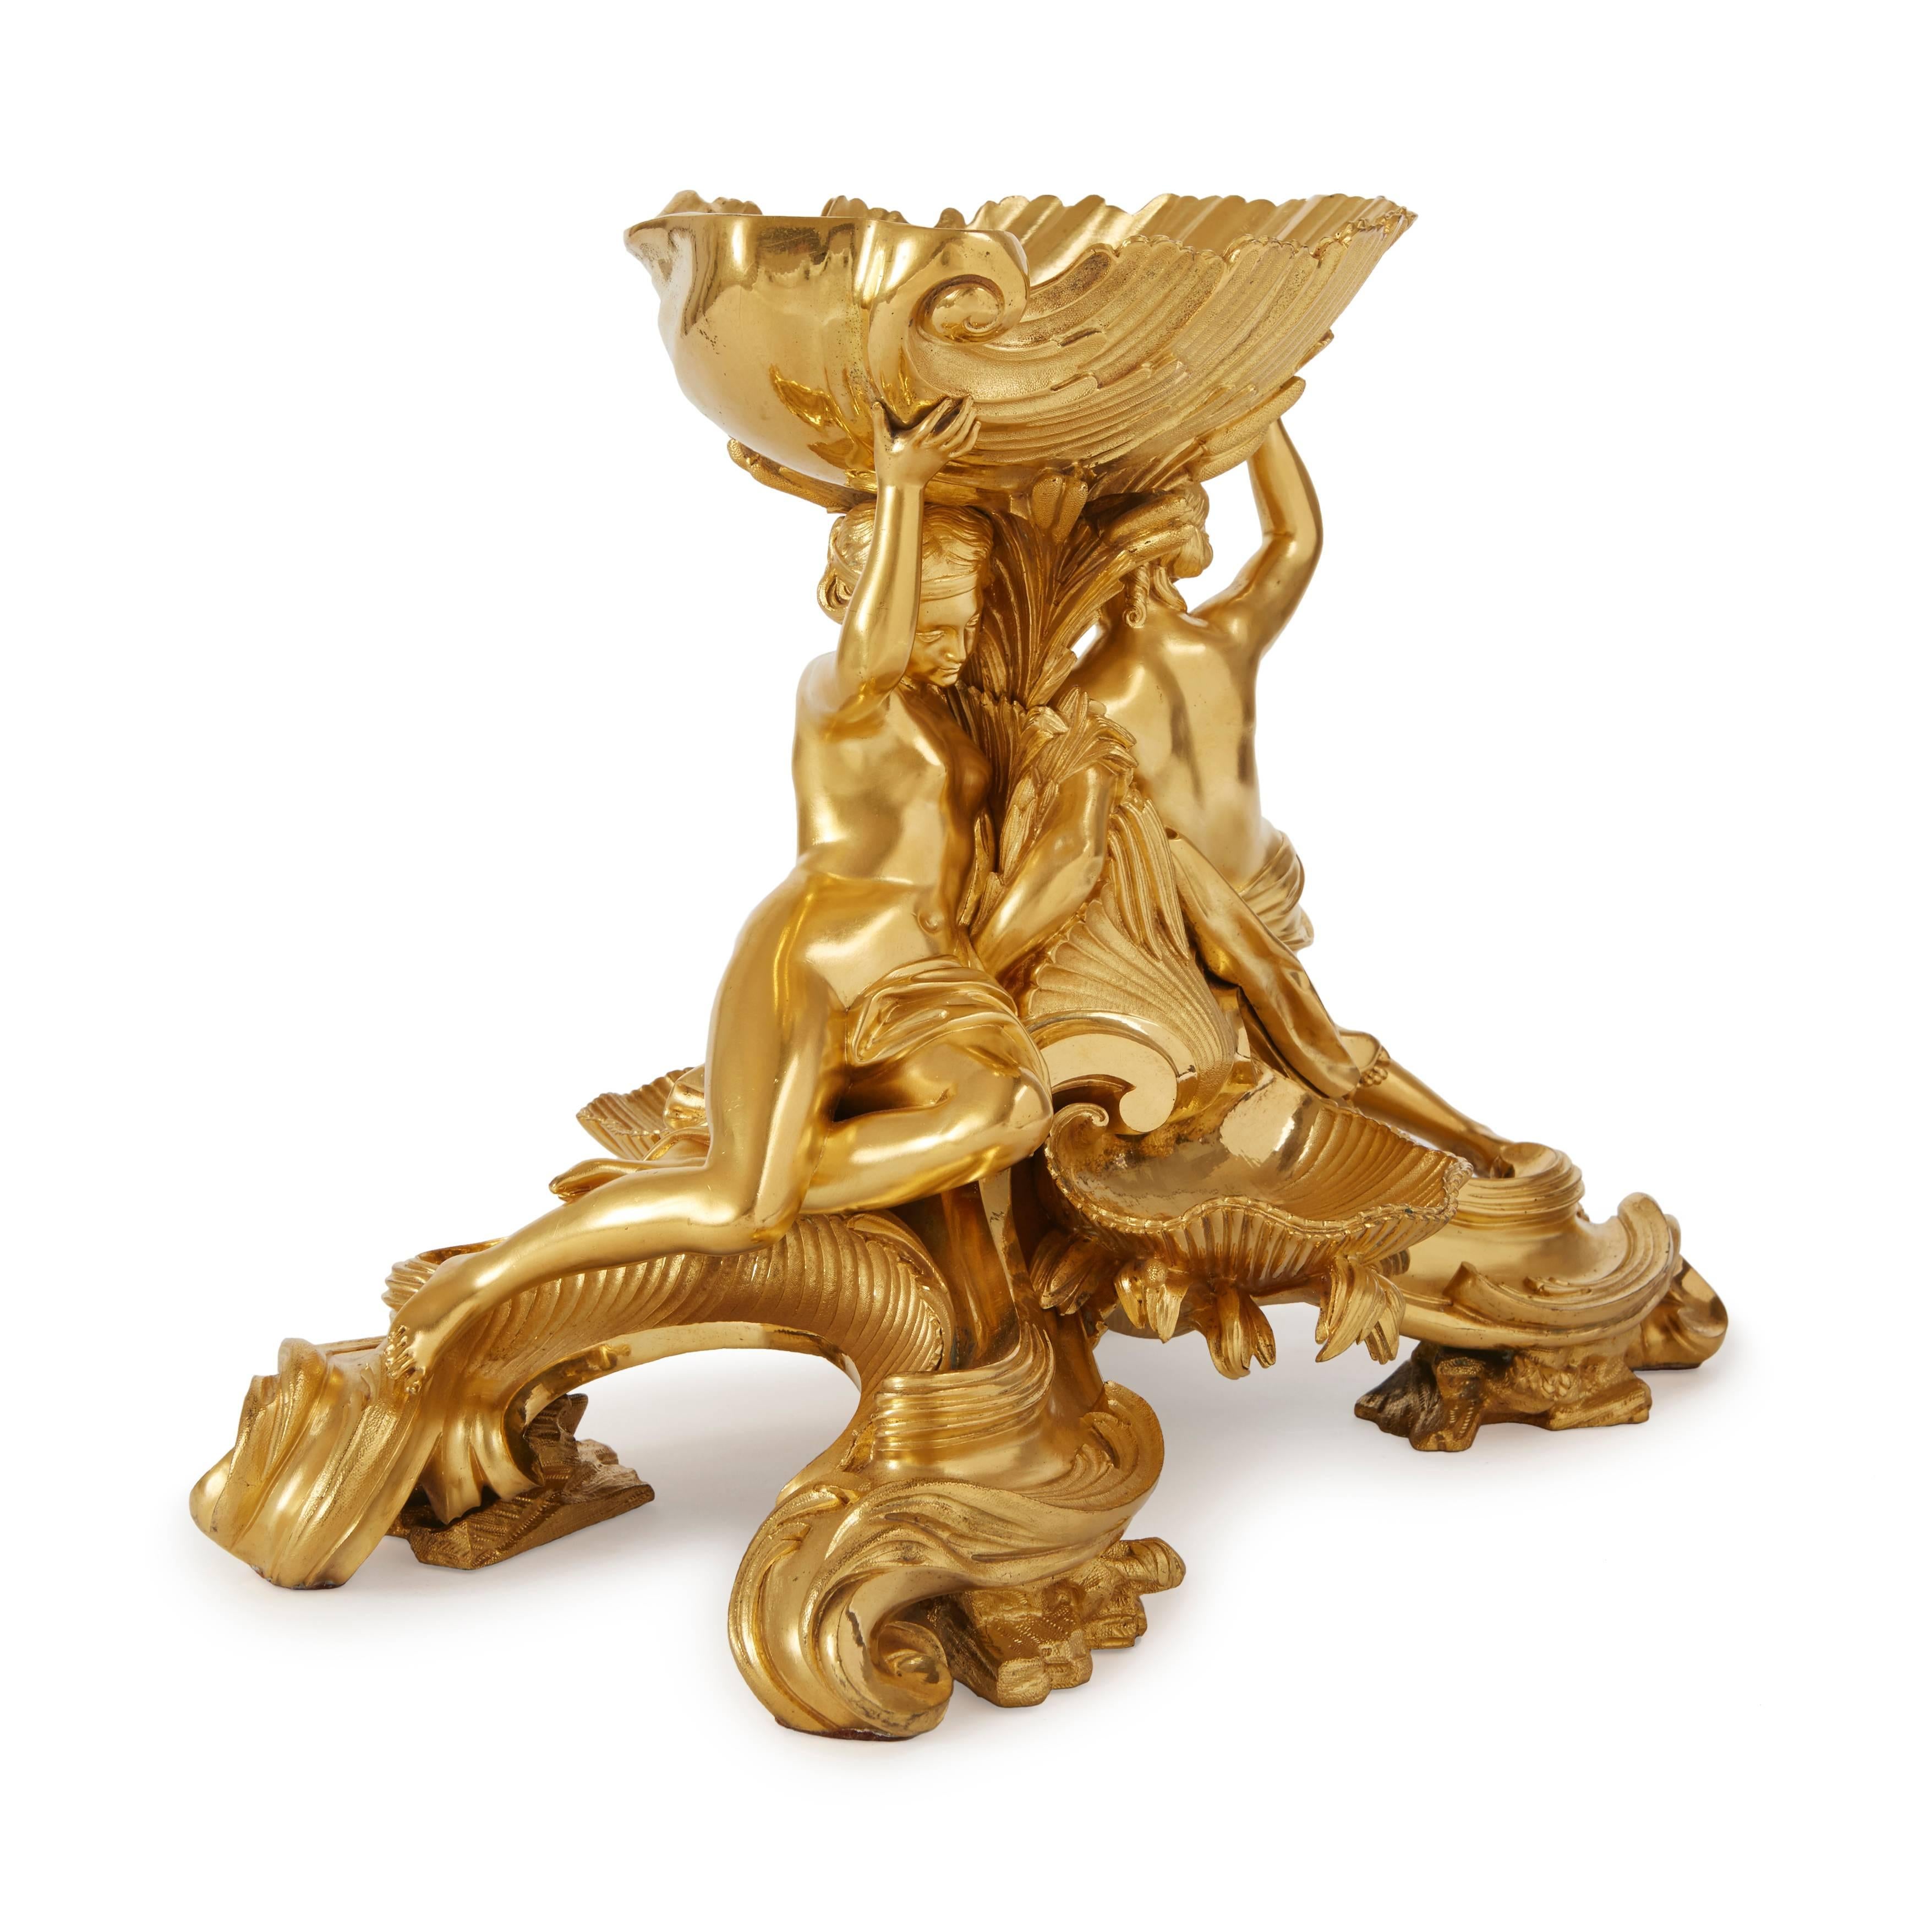 Very fine ormolu salt-cellar centrepiece. Modelled as two nymphs lying on a Rocaille base with foliage and shells, supporting a large shell above their heads.